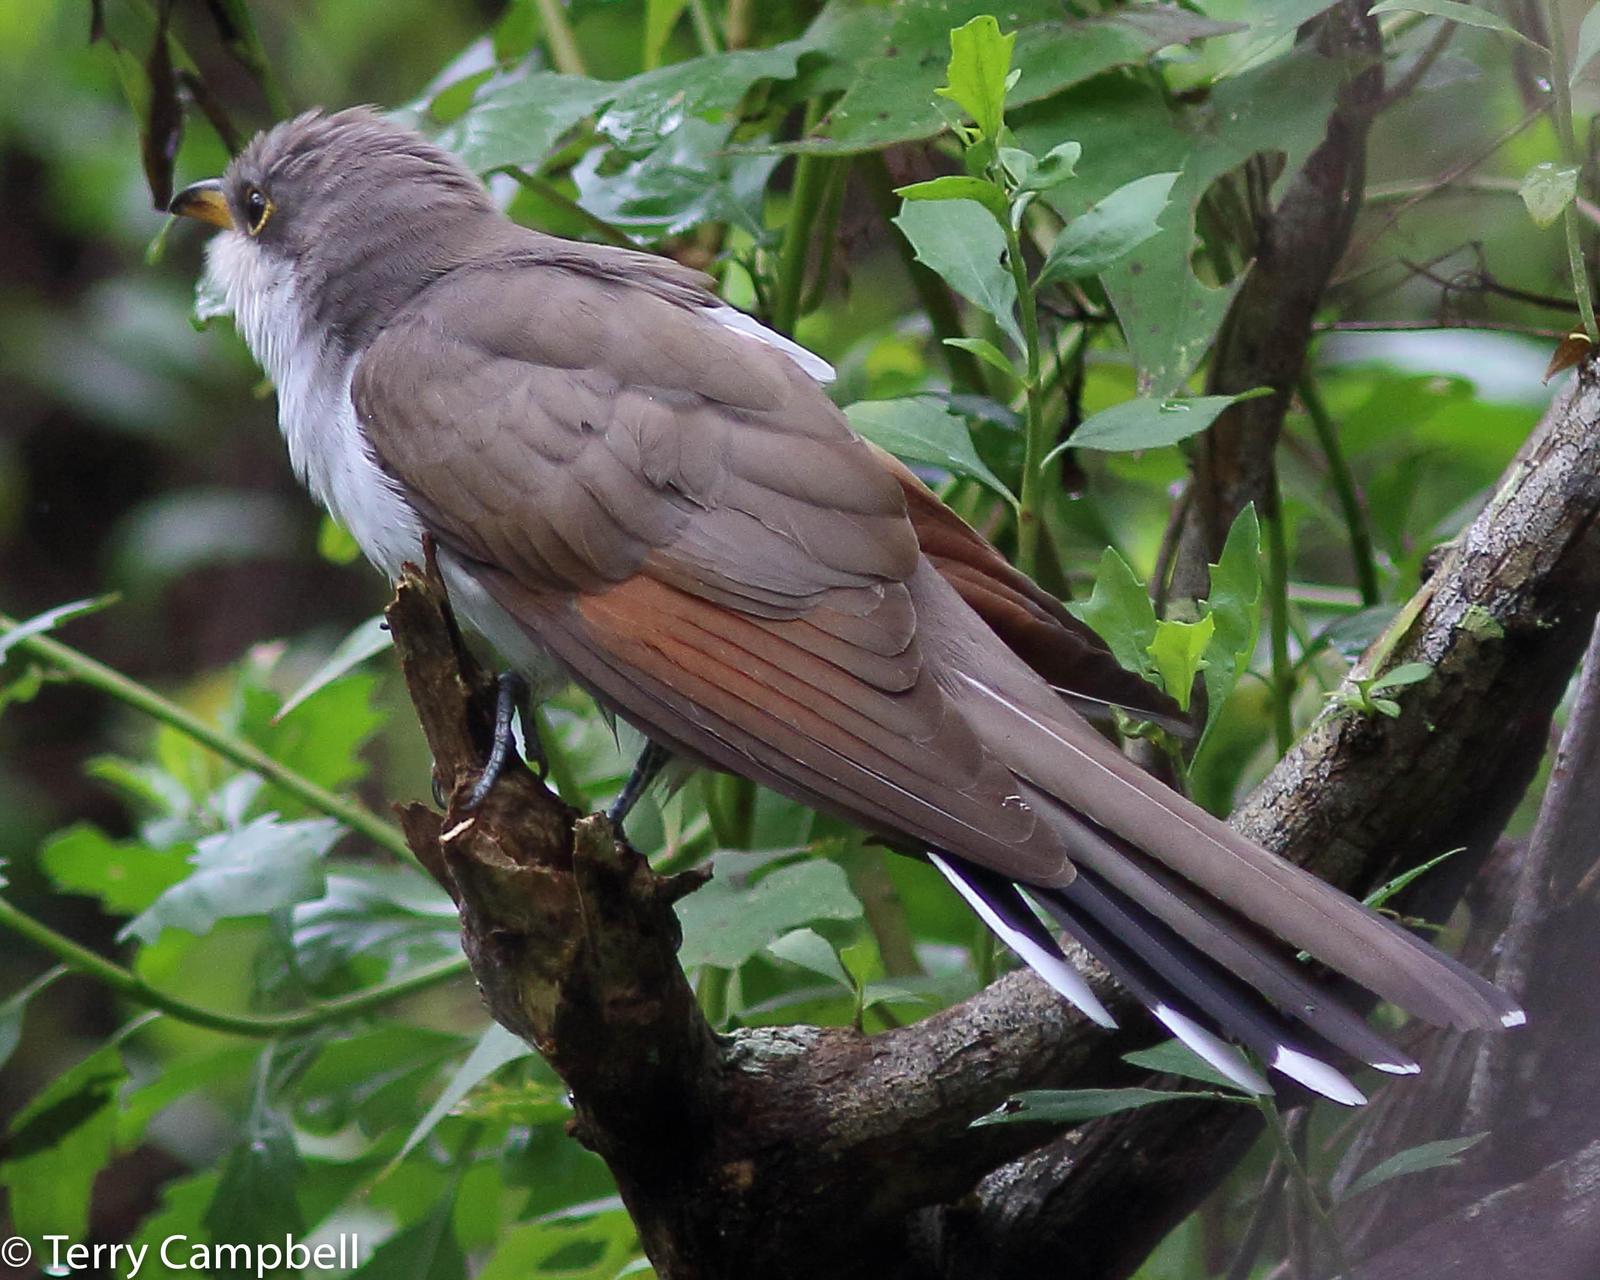 Yellow-billed Cuckoo Photo by Terry Campbell